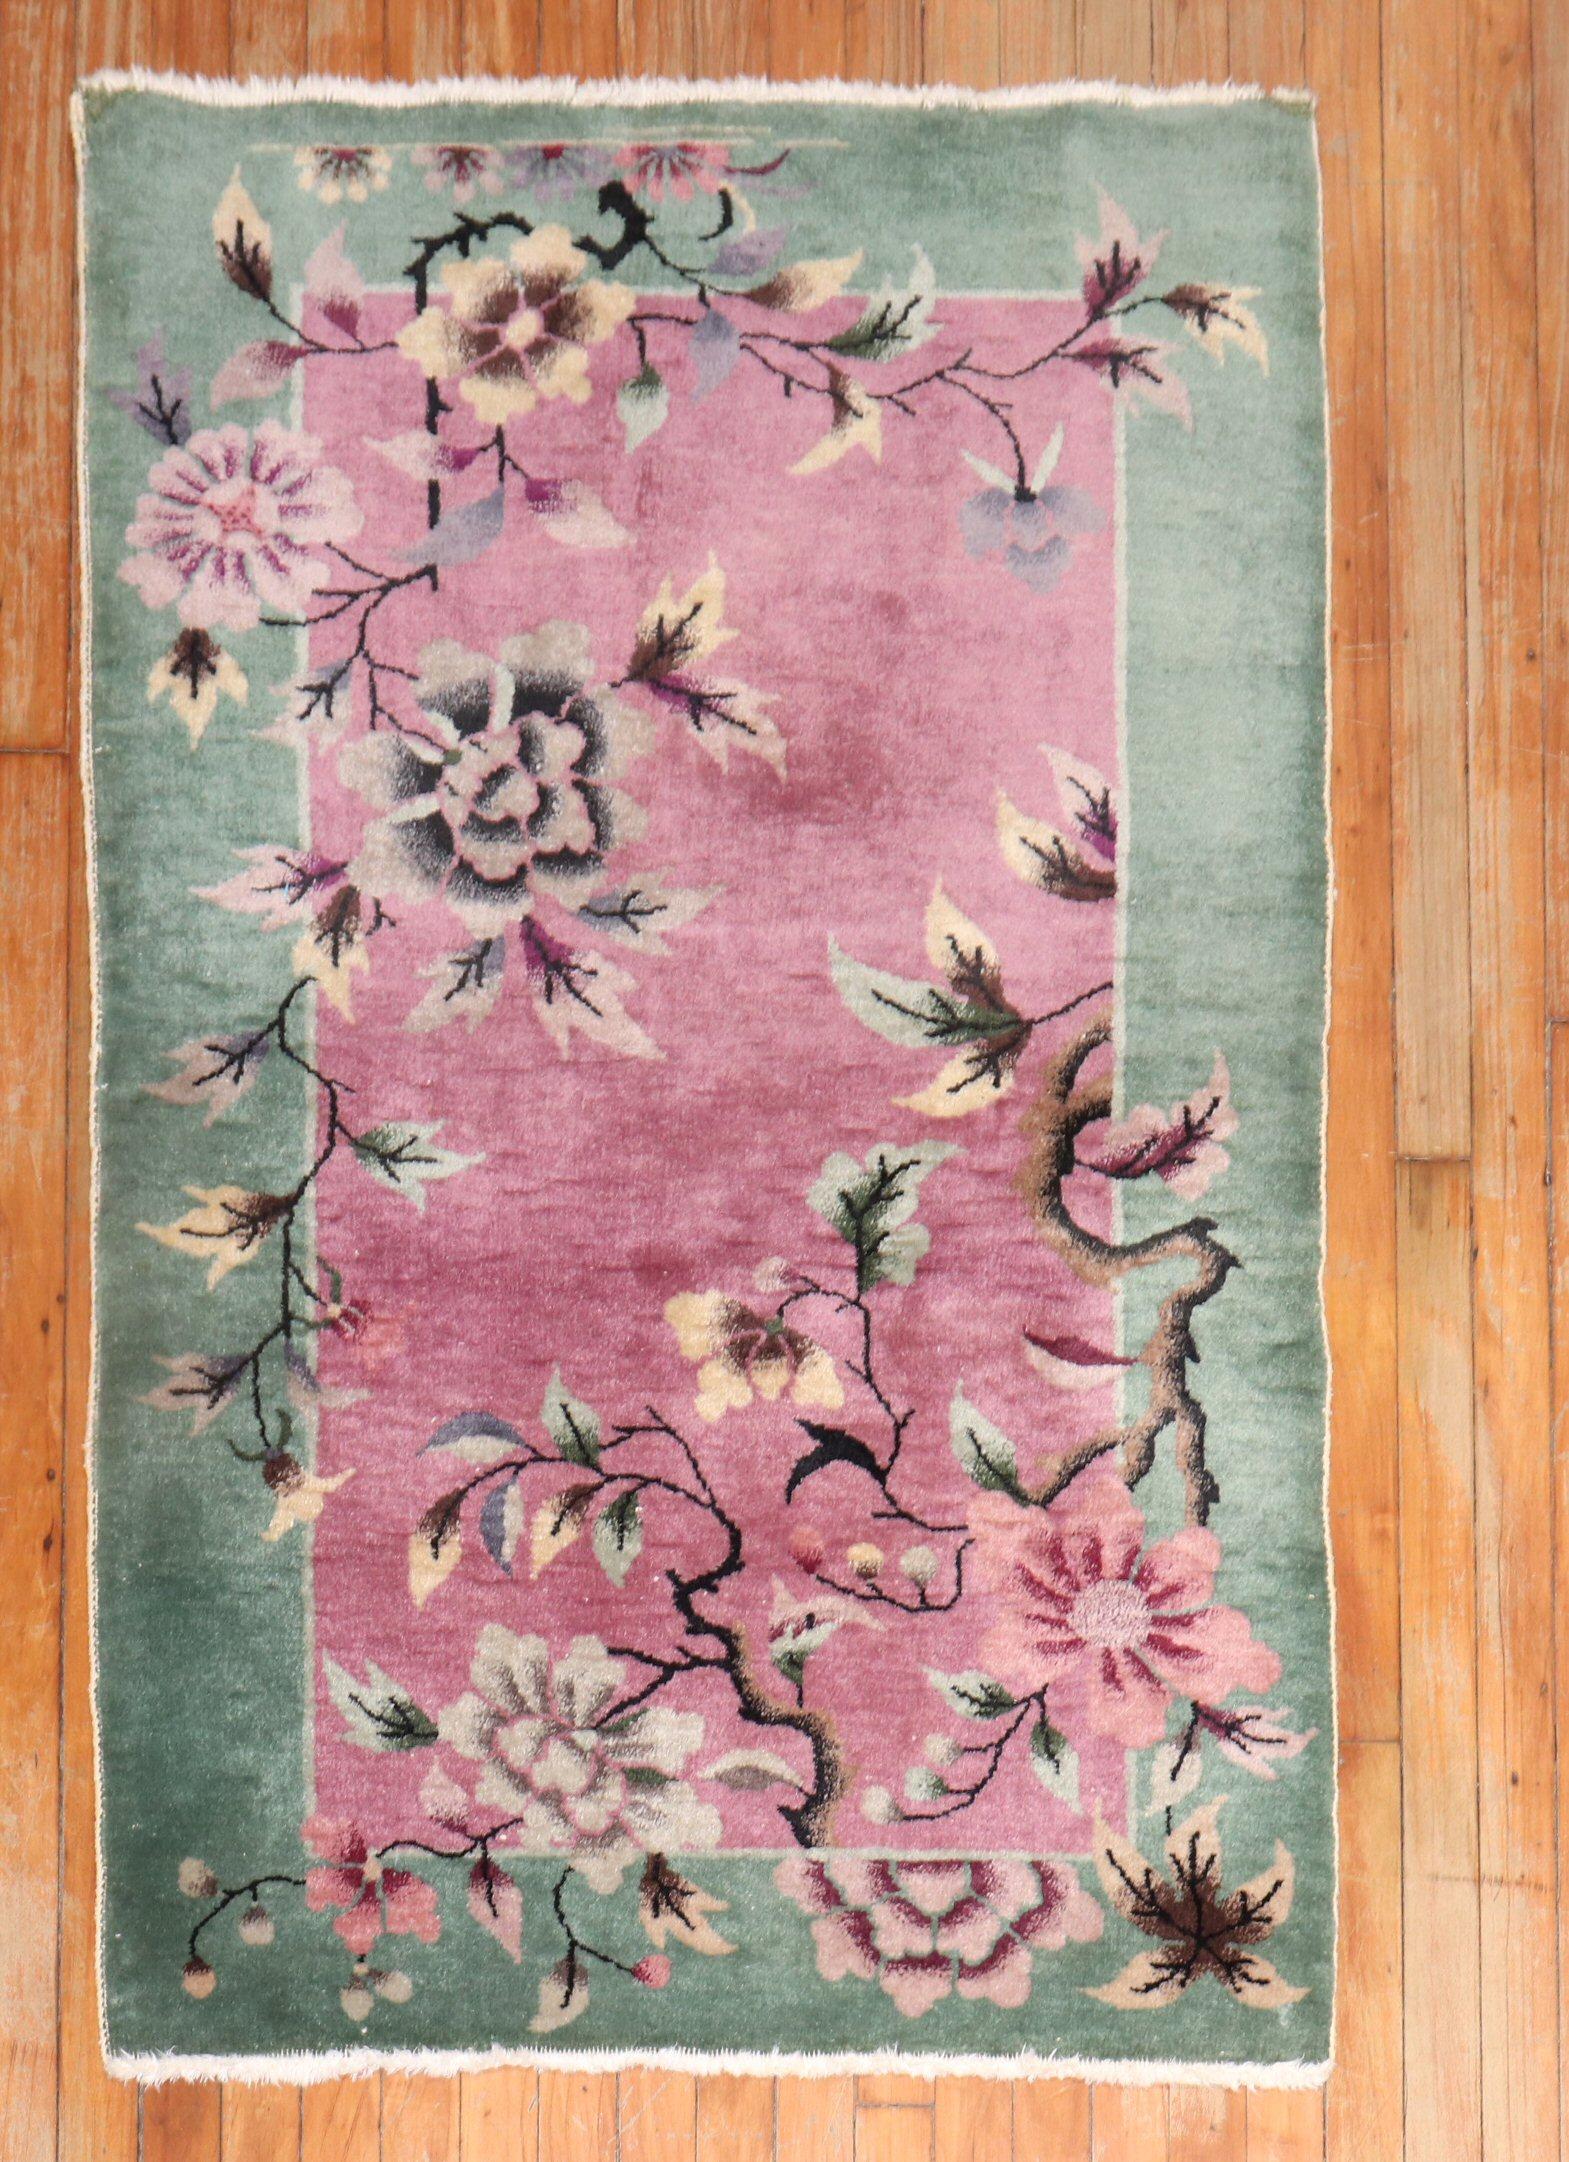 Chinese Nichols art deco scatter size rug in pretty pinks and greens

Measures: 3' x 4'9